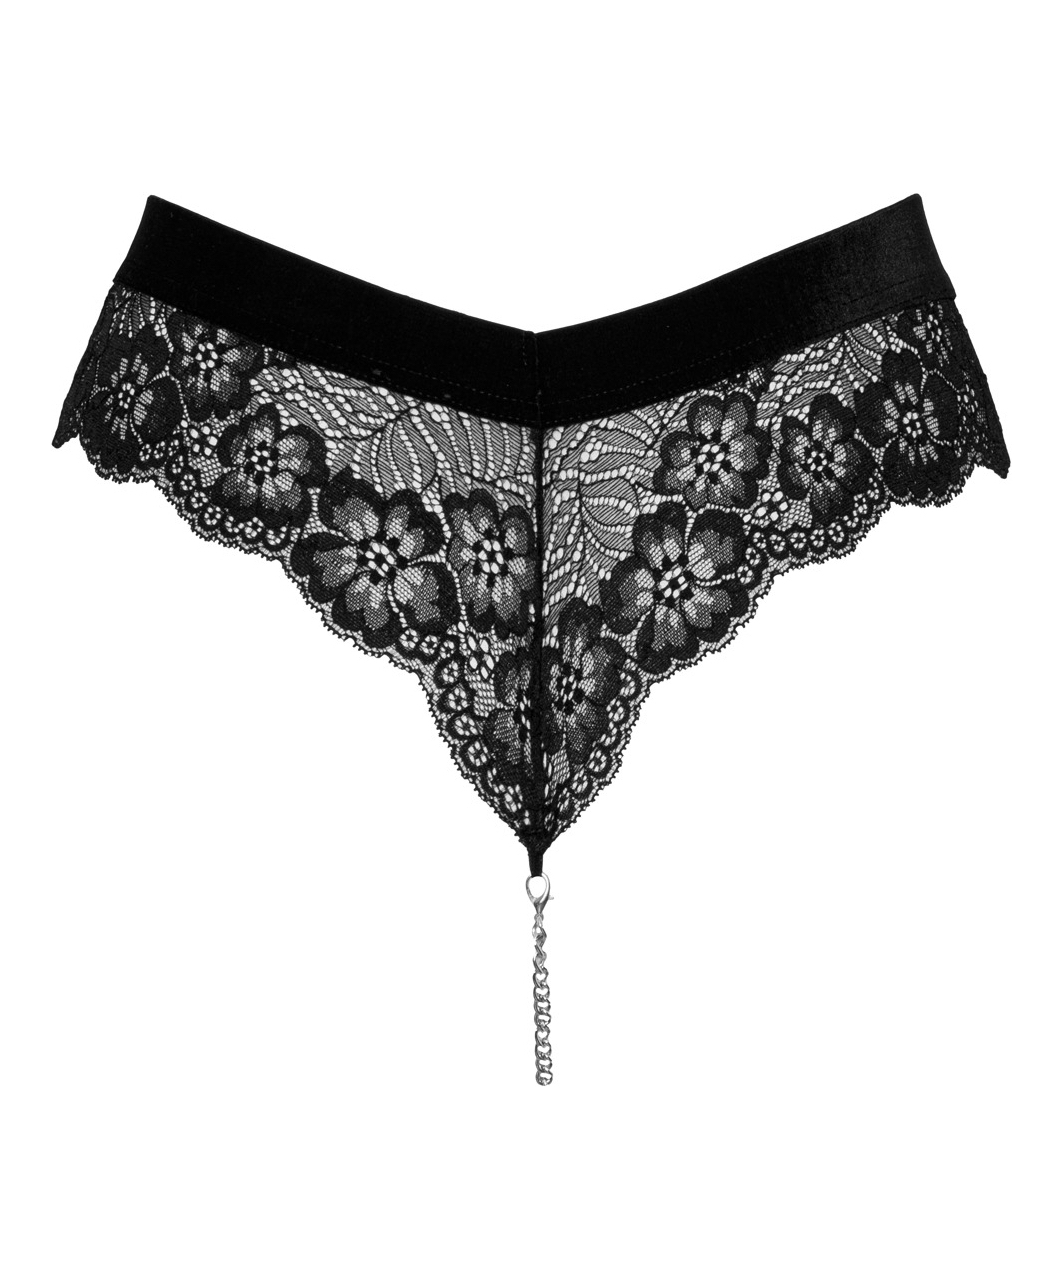 Cottelli Lingerie black lace thong with chain